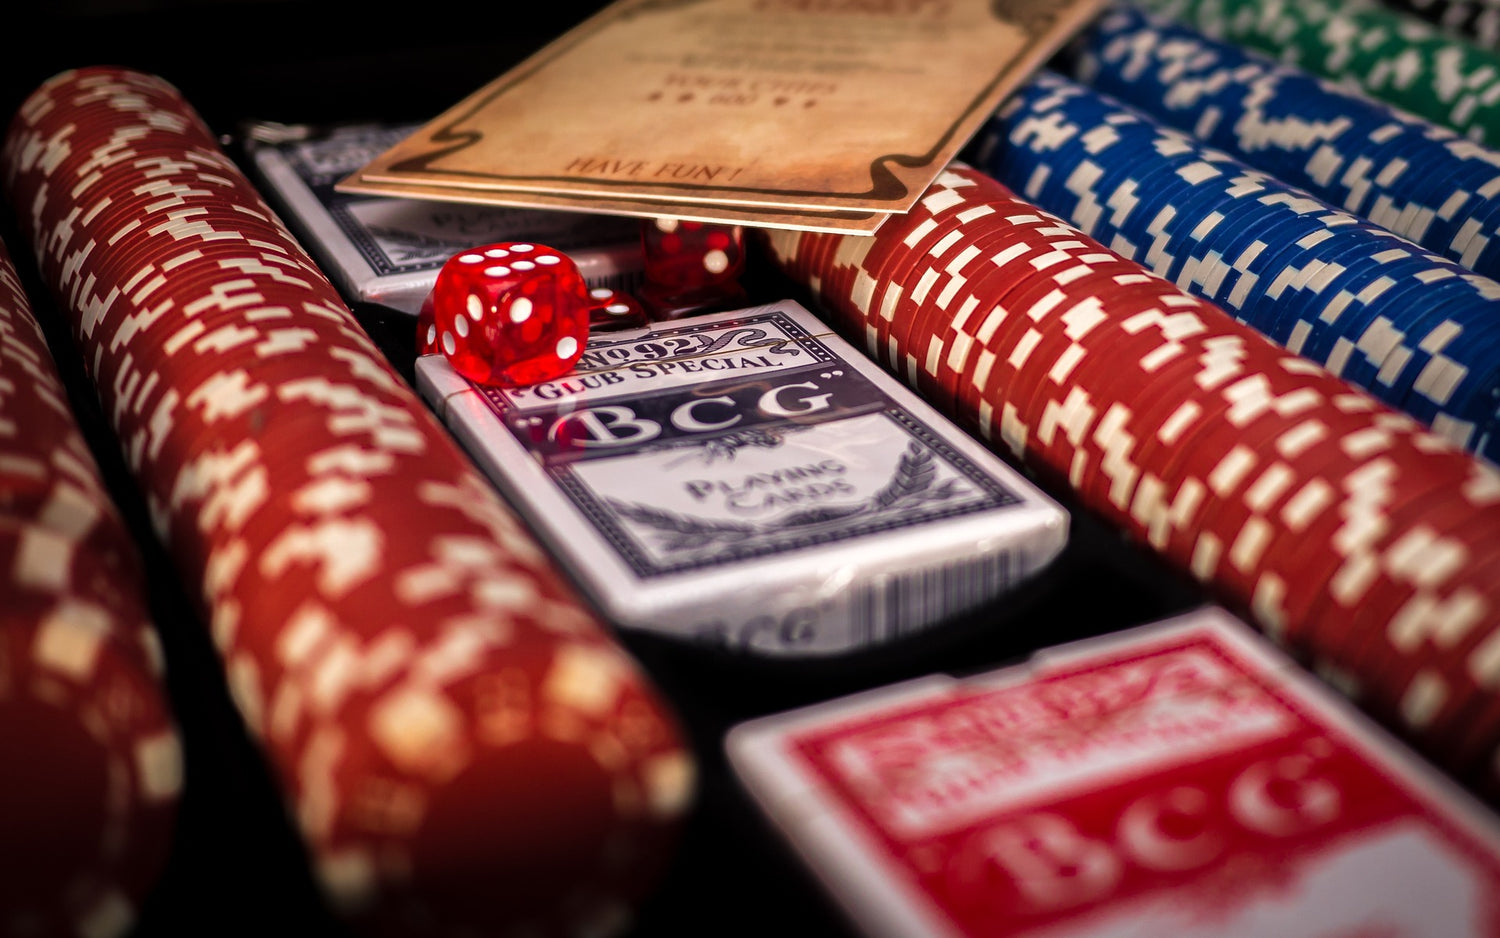 Poker chips cards and a dice